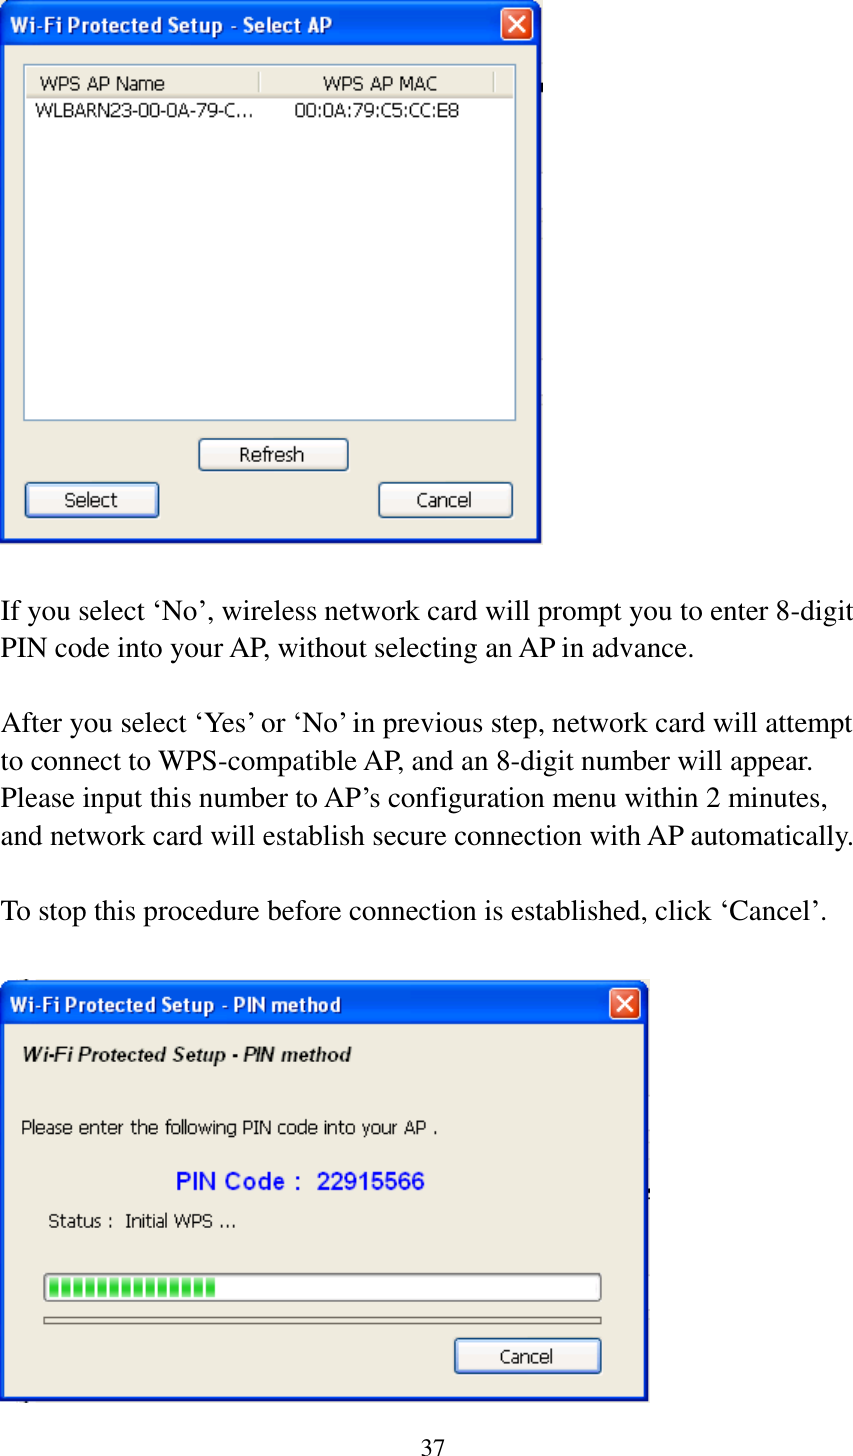 37    If you select ‘No’, wireless network card will prompt you to enter 8-digit PIN code into your AP, without selecting an AP in advance.  After you select ‘Yes’ or ‘No’ in previous step, network card will attempt to connect to WPS-compatible AP, and an 8-digit number will appear. Please input this number to AP’s configuration menu within 2 minutes, and network card will establish secure connection with AP automatically.  To stop this procedure before connection is established, click ‘Cancel’.   